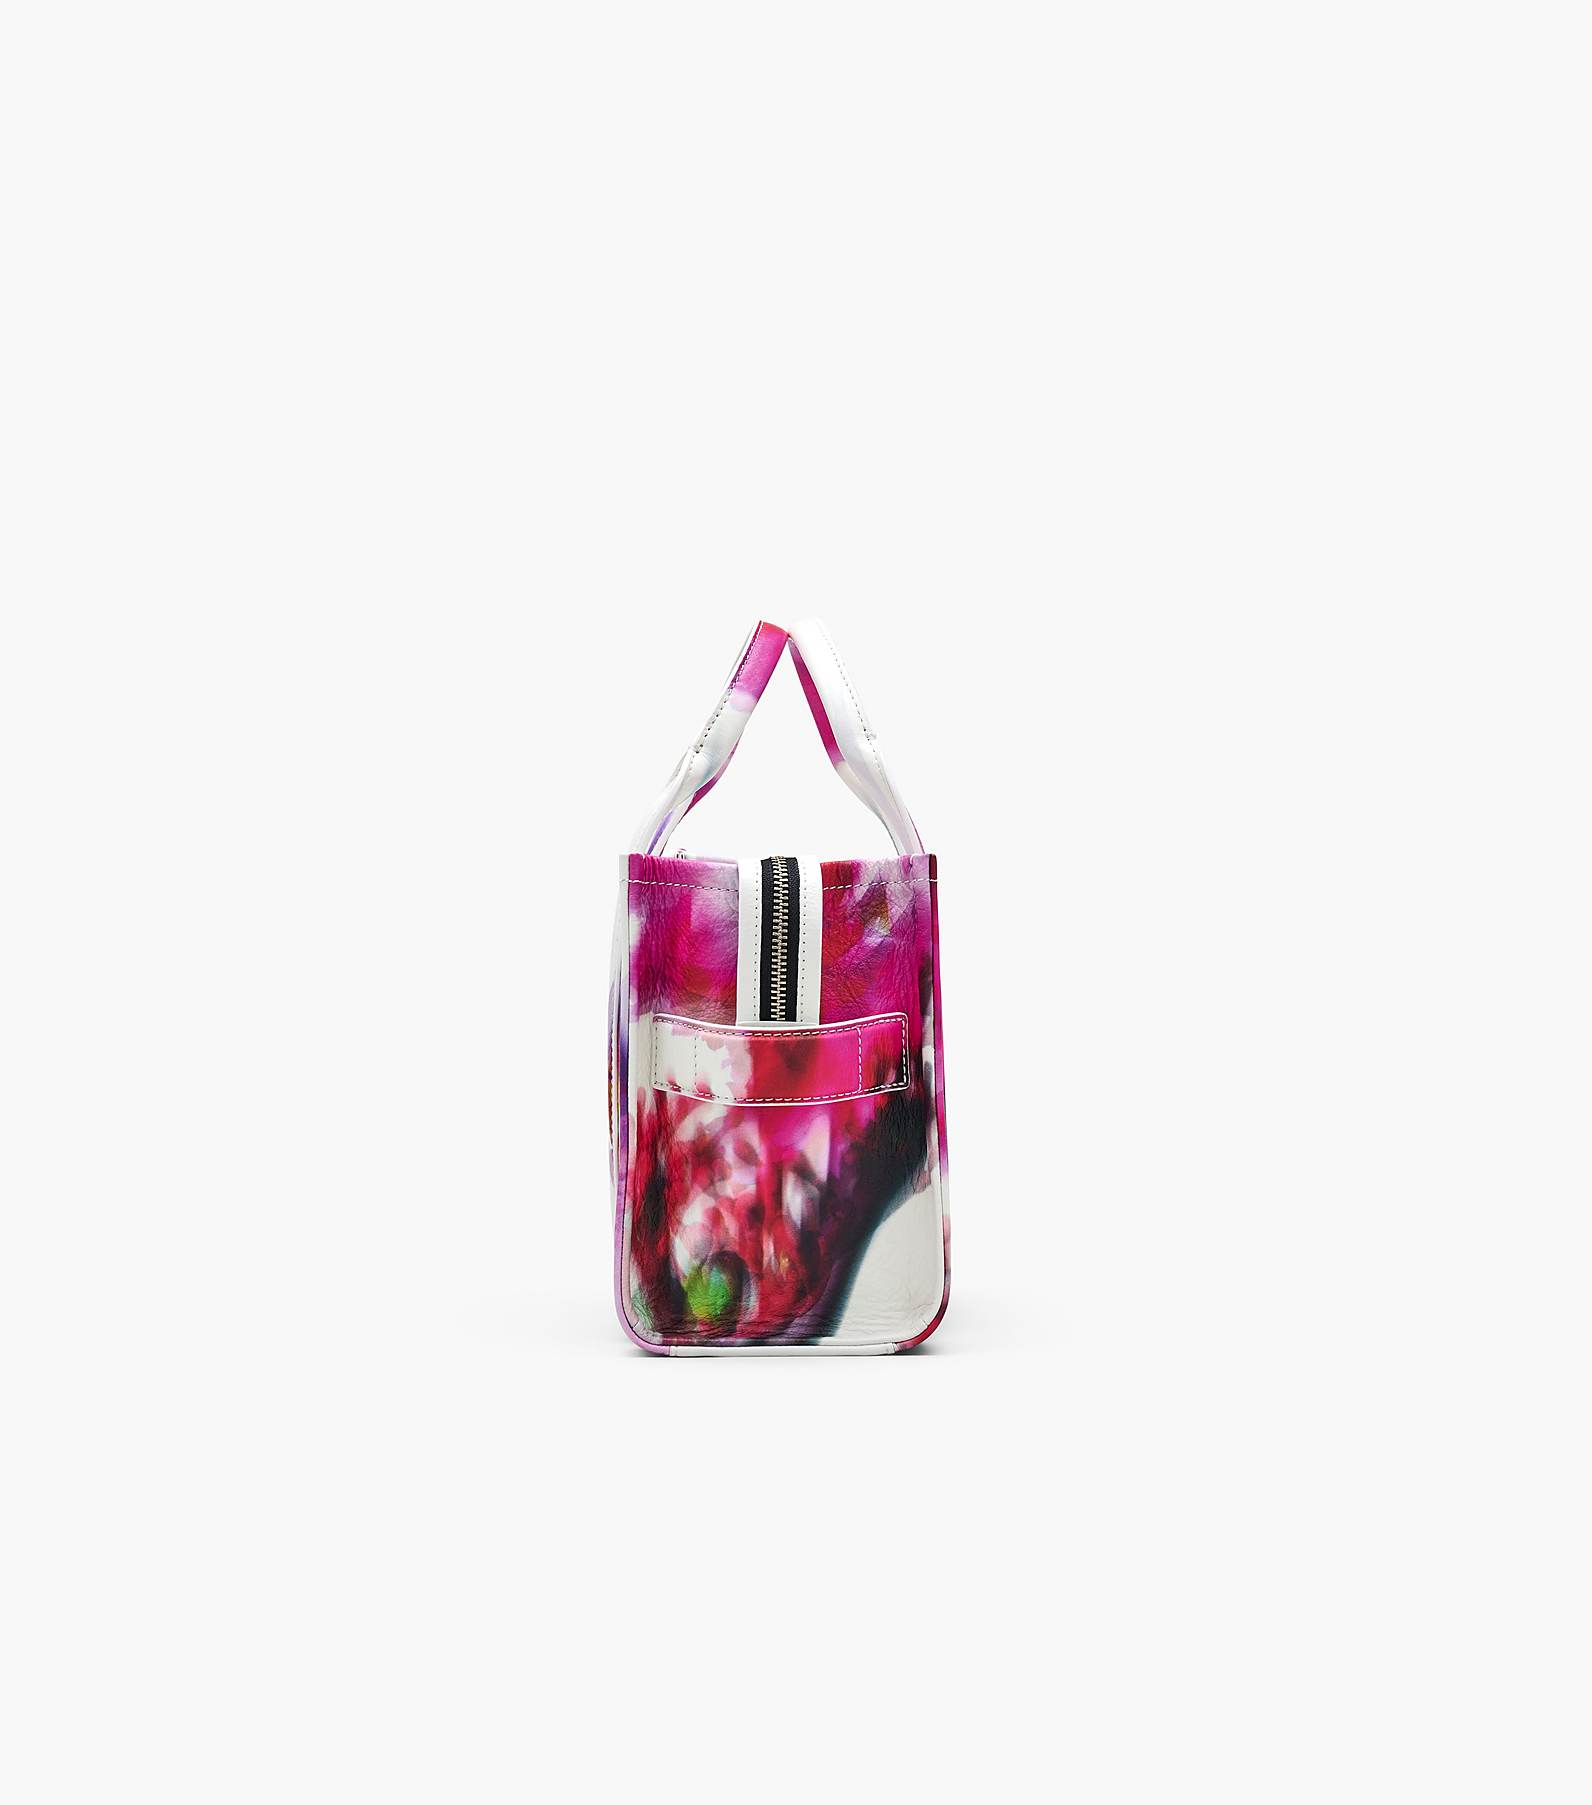 THE FUTURE FLORAL LEATHER TOTE BAG SMALL(null)